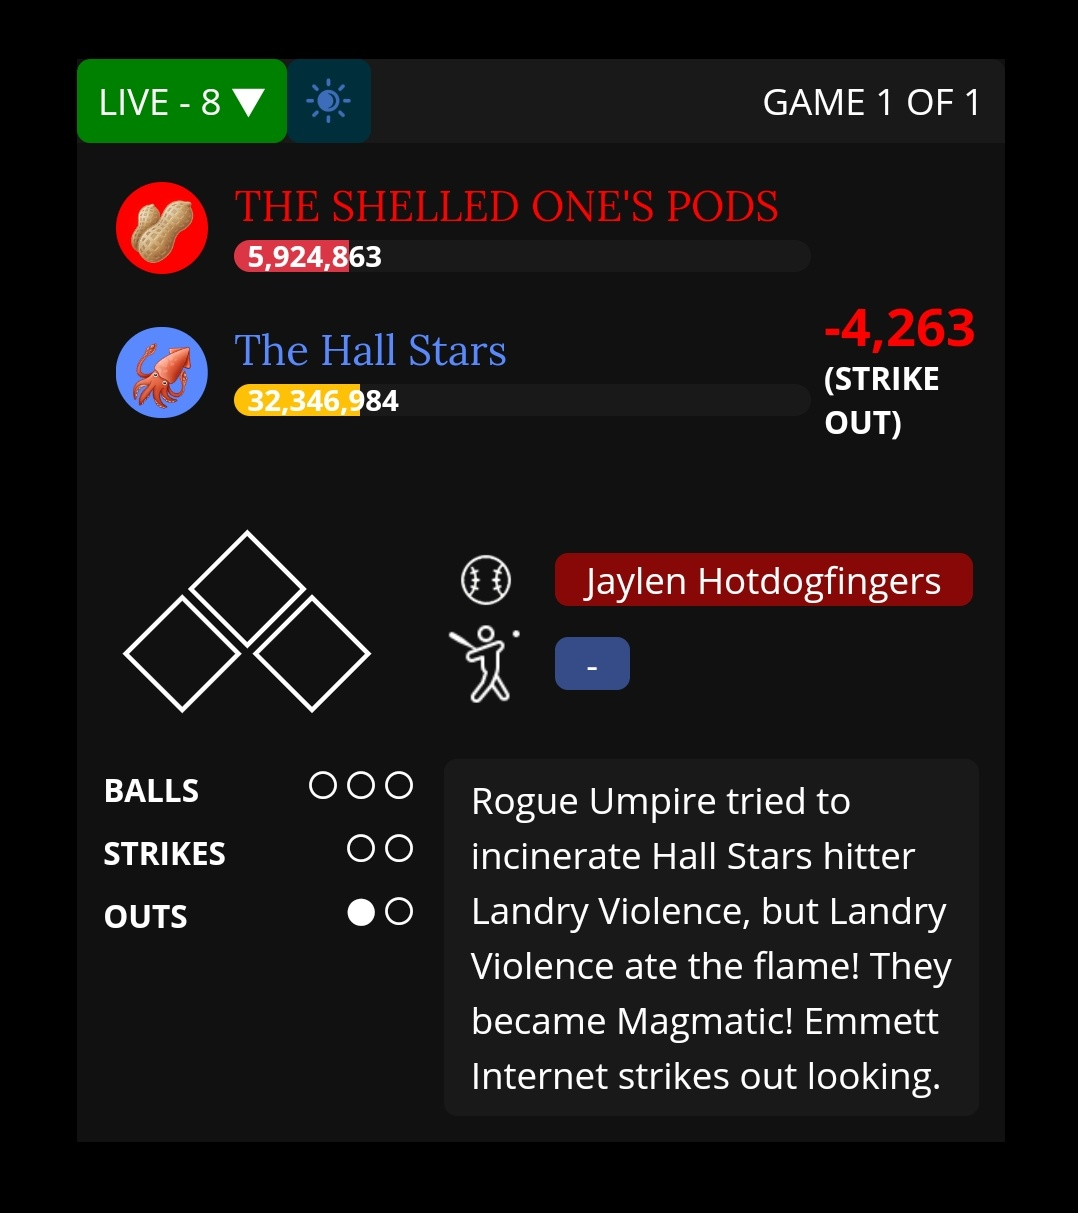 A screenshot of the Hallstars taking on the Shelled Ones. Jaylen Hotdogfingers is up to bat and Landry Violence has eaten the flame of a rogue umpire who tried to incinerate him.